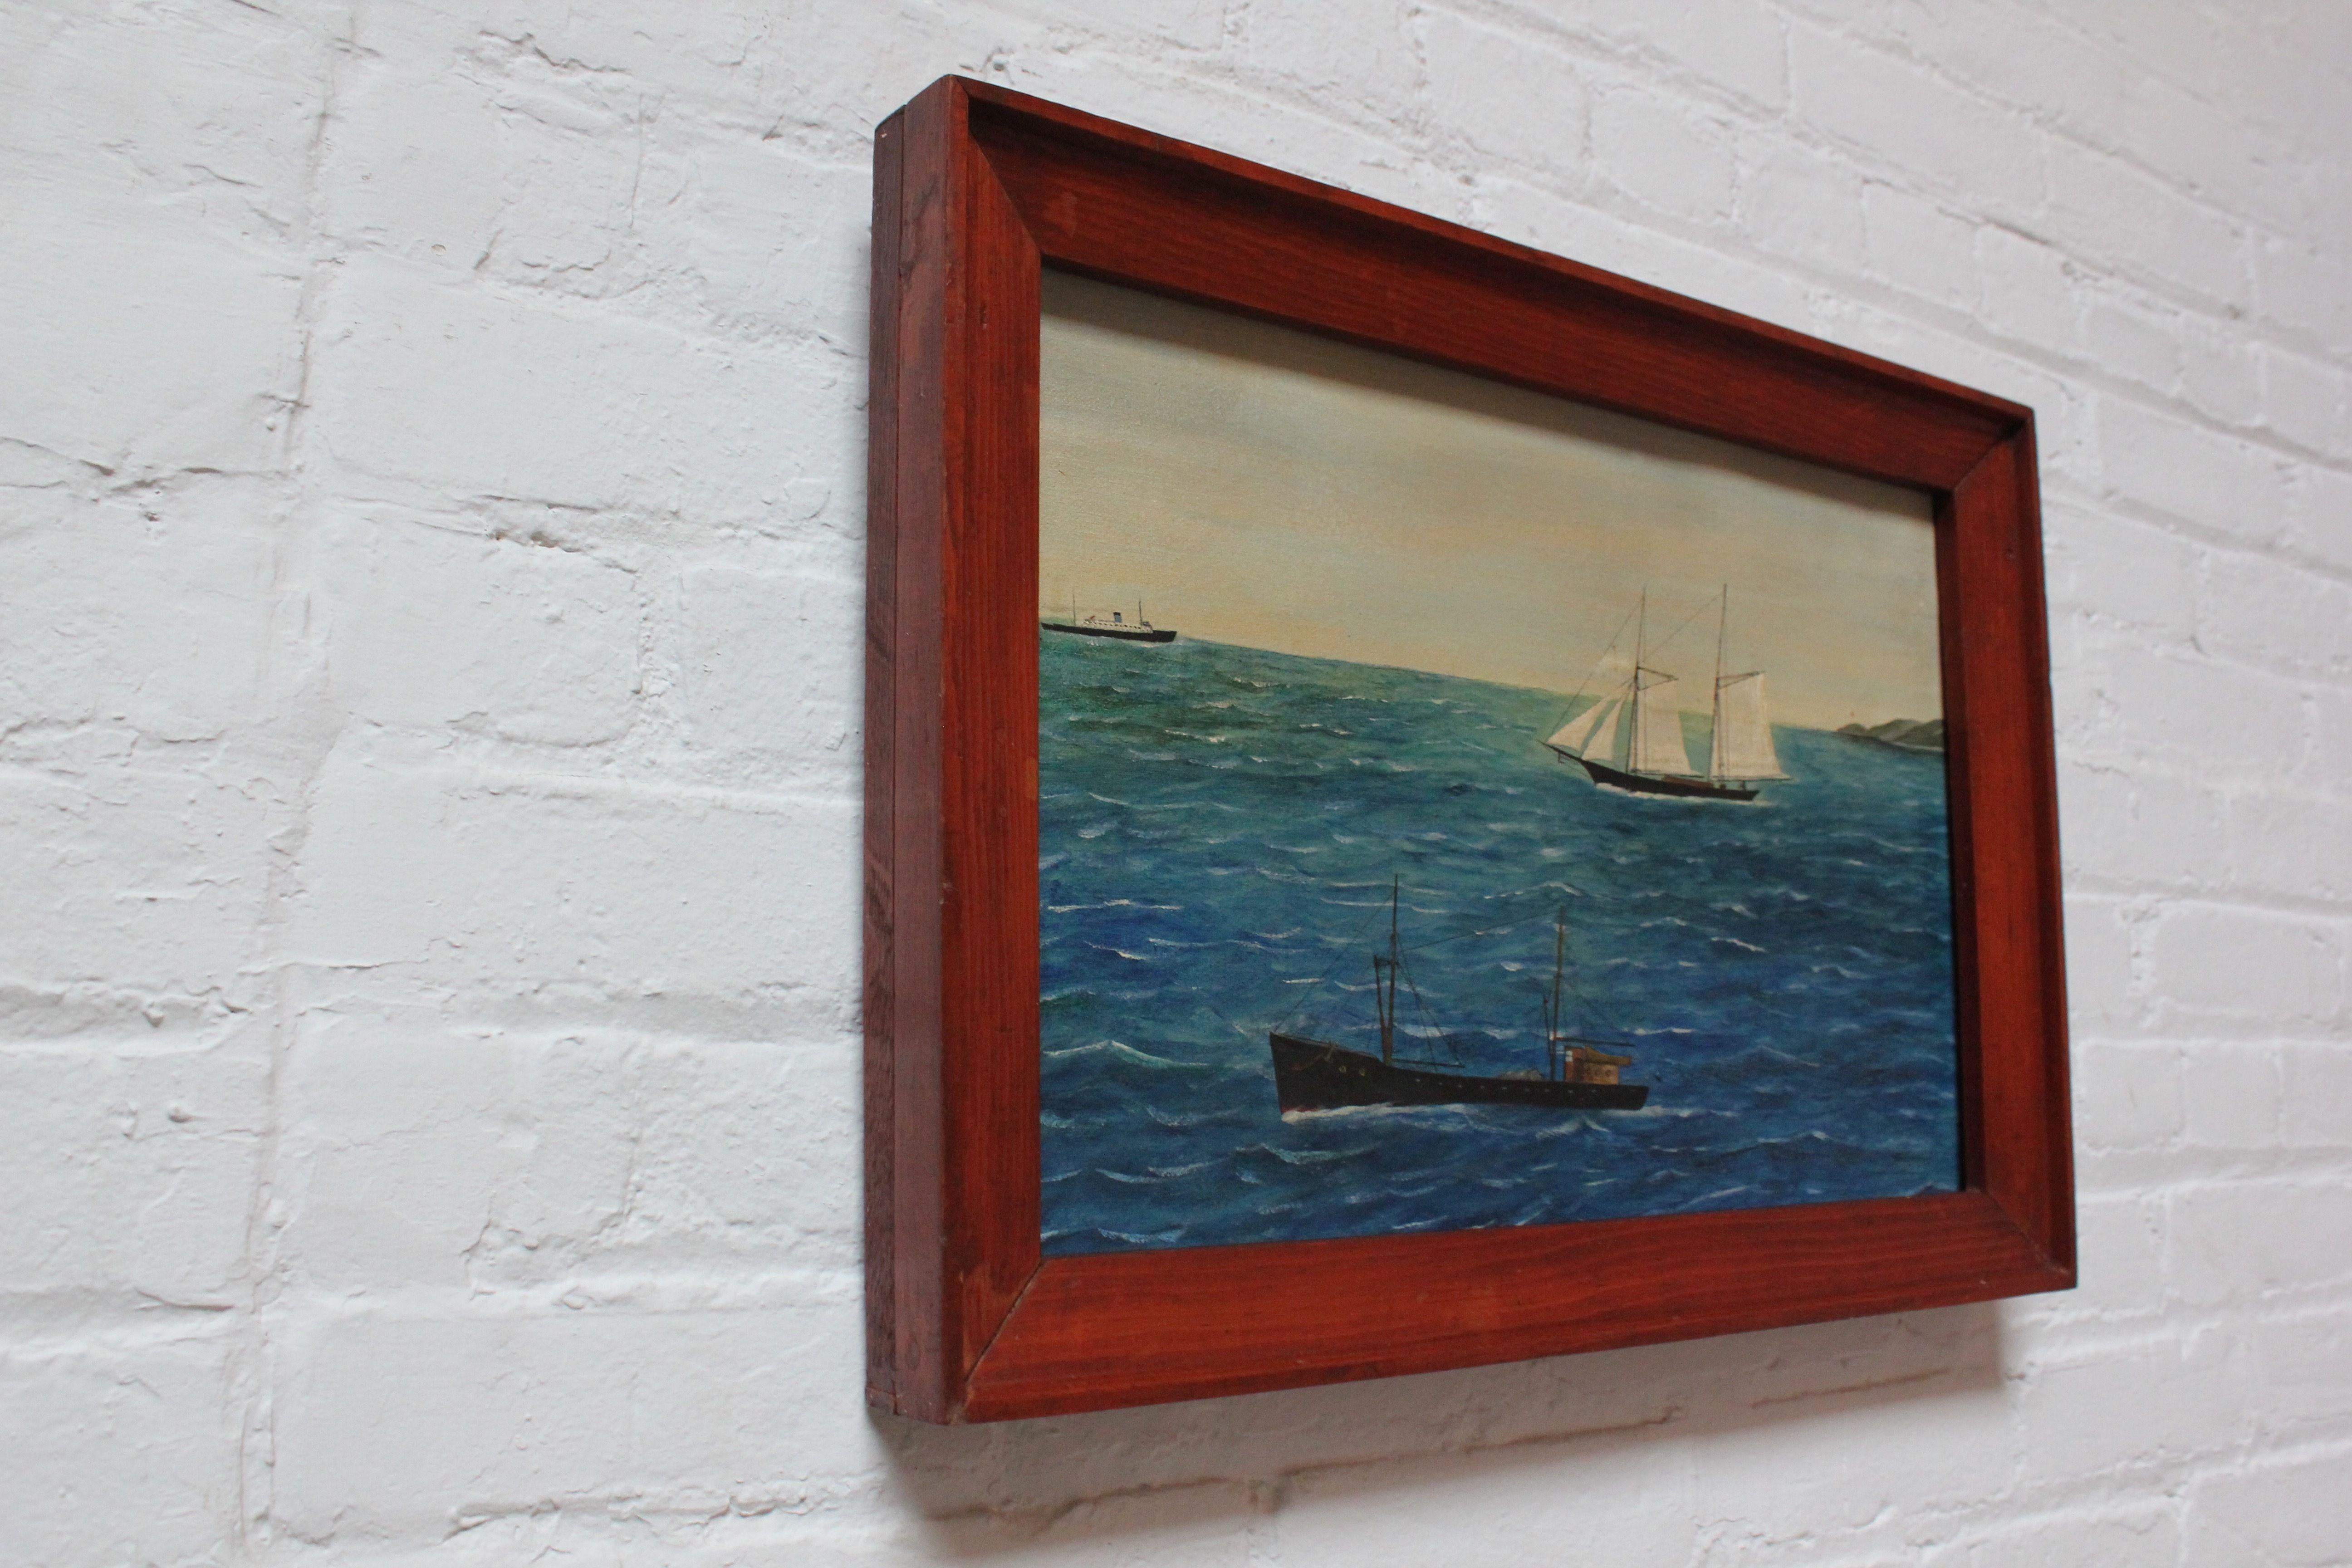 Nautical oil on canvas featuring three ships on the calm seas (ca. 1950s, USA). Few spots of discoloration present to the frame, as shown. Canvas is in fine, vintage condition.
Unsigned.
Framed: H: 15